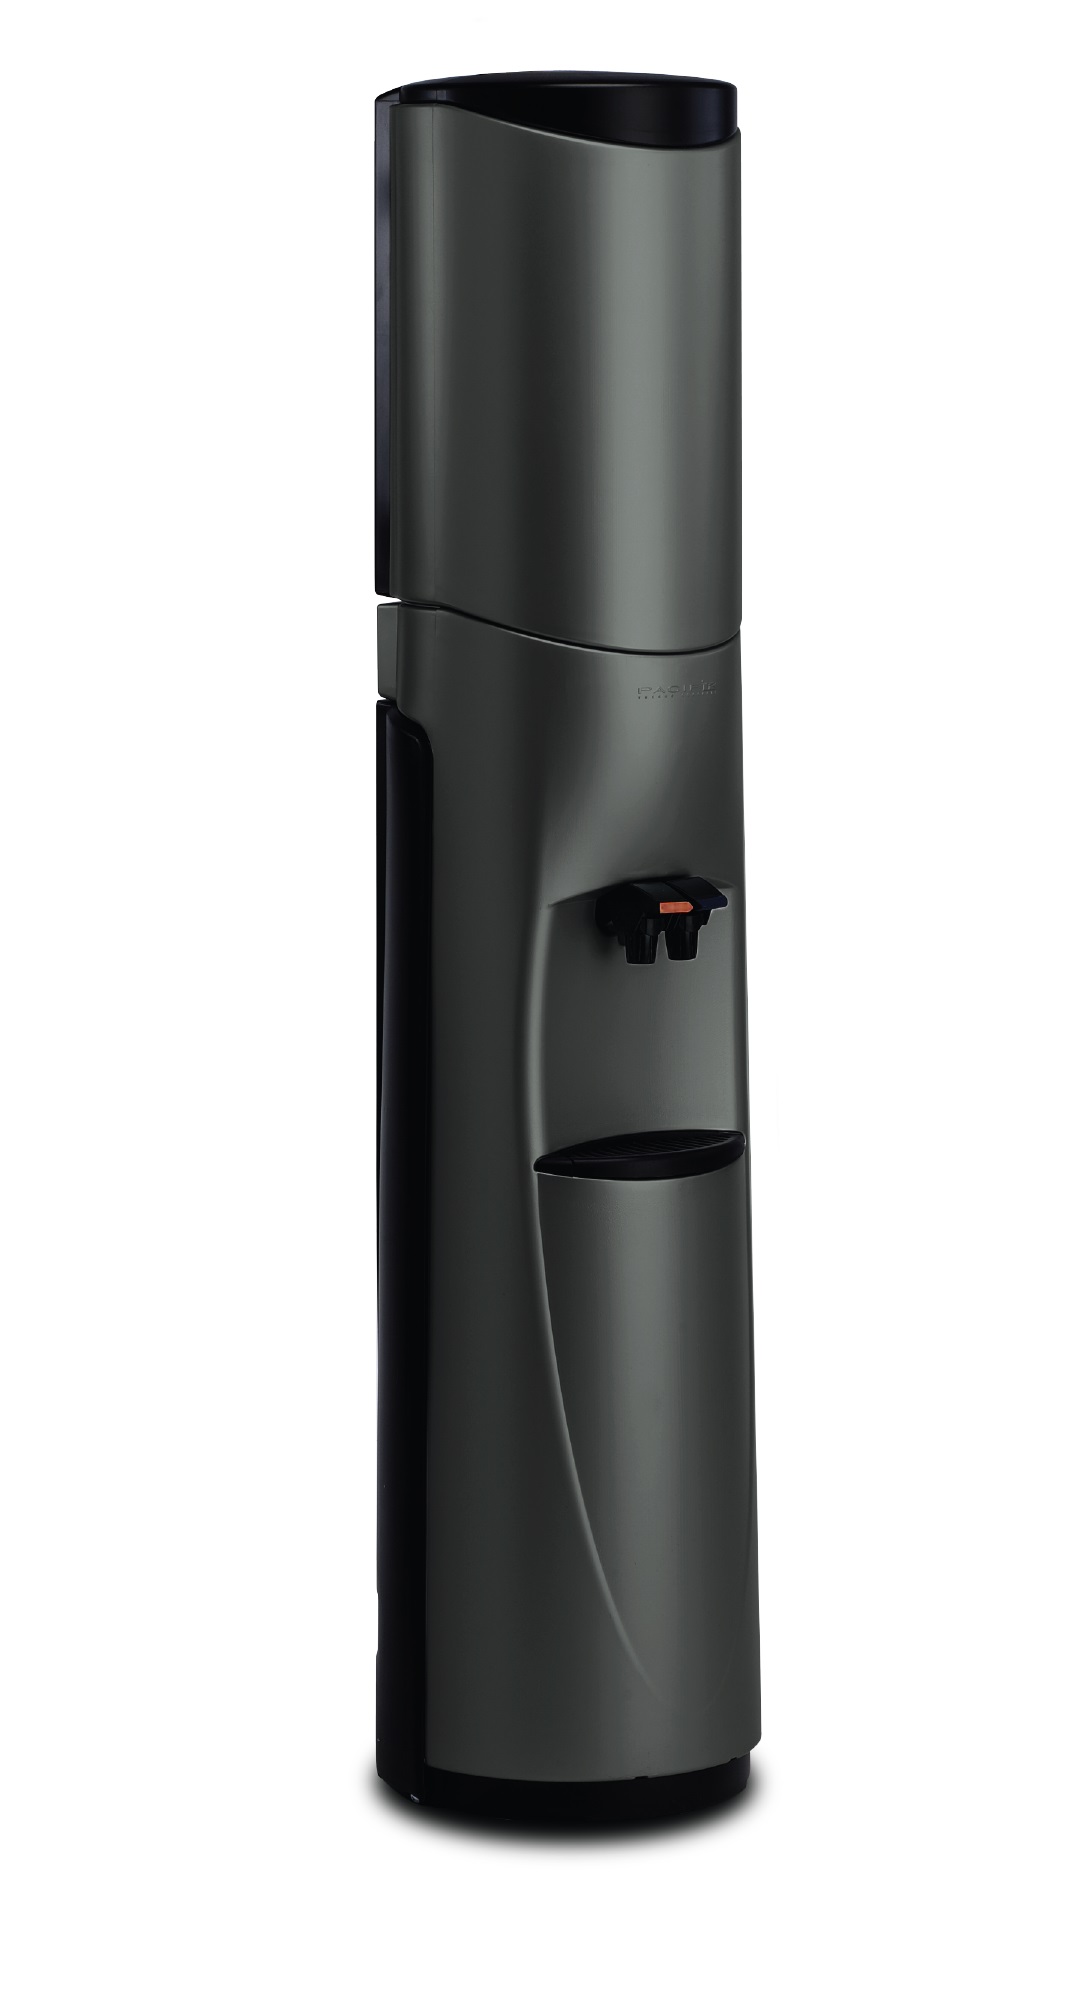 Pacifik High Tech Bottleless Water Cooler in Charcoal with Black Trim - Hot/Cold